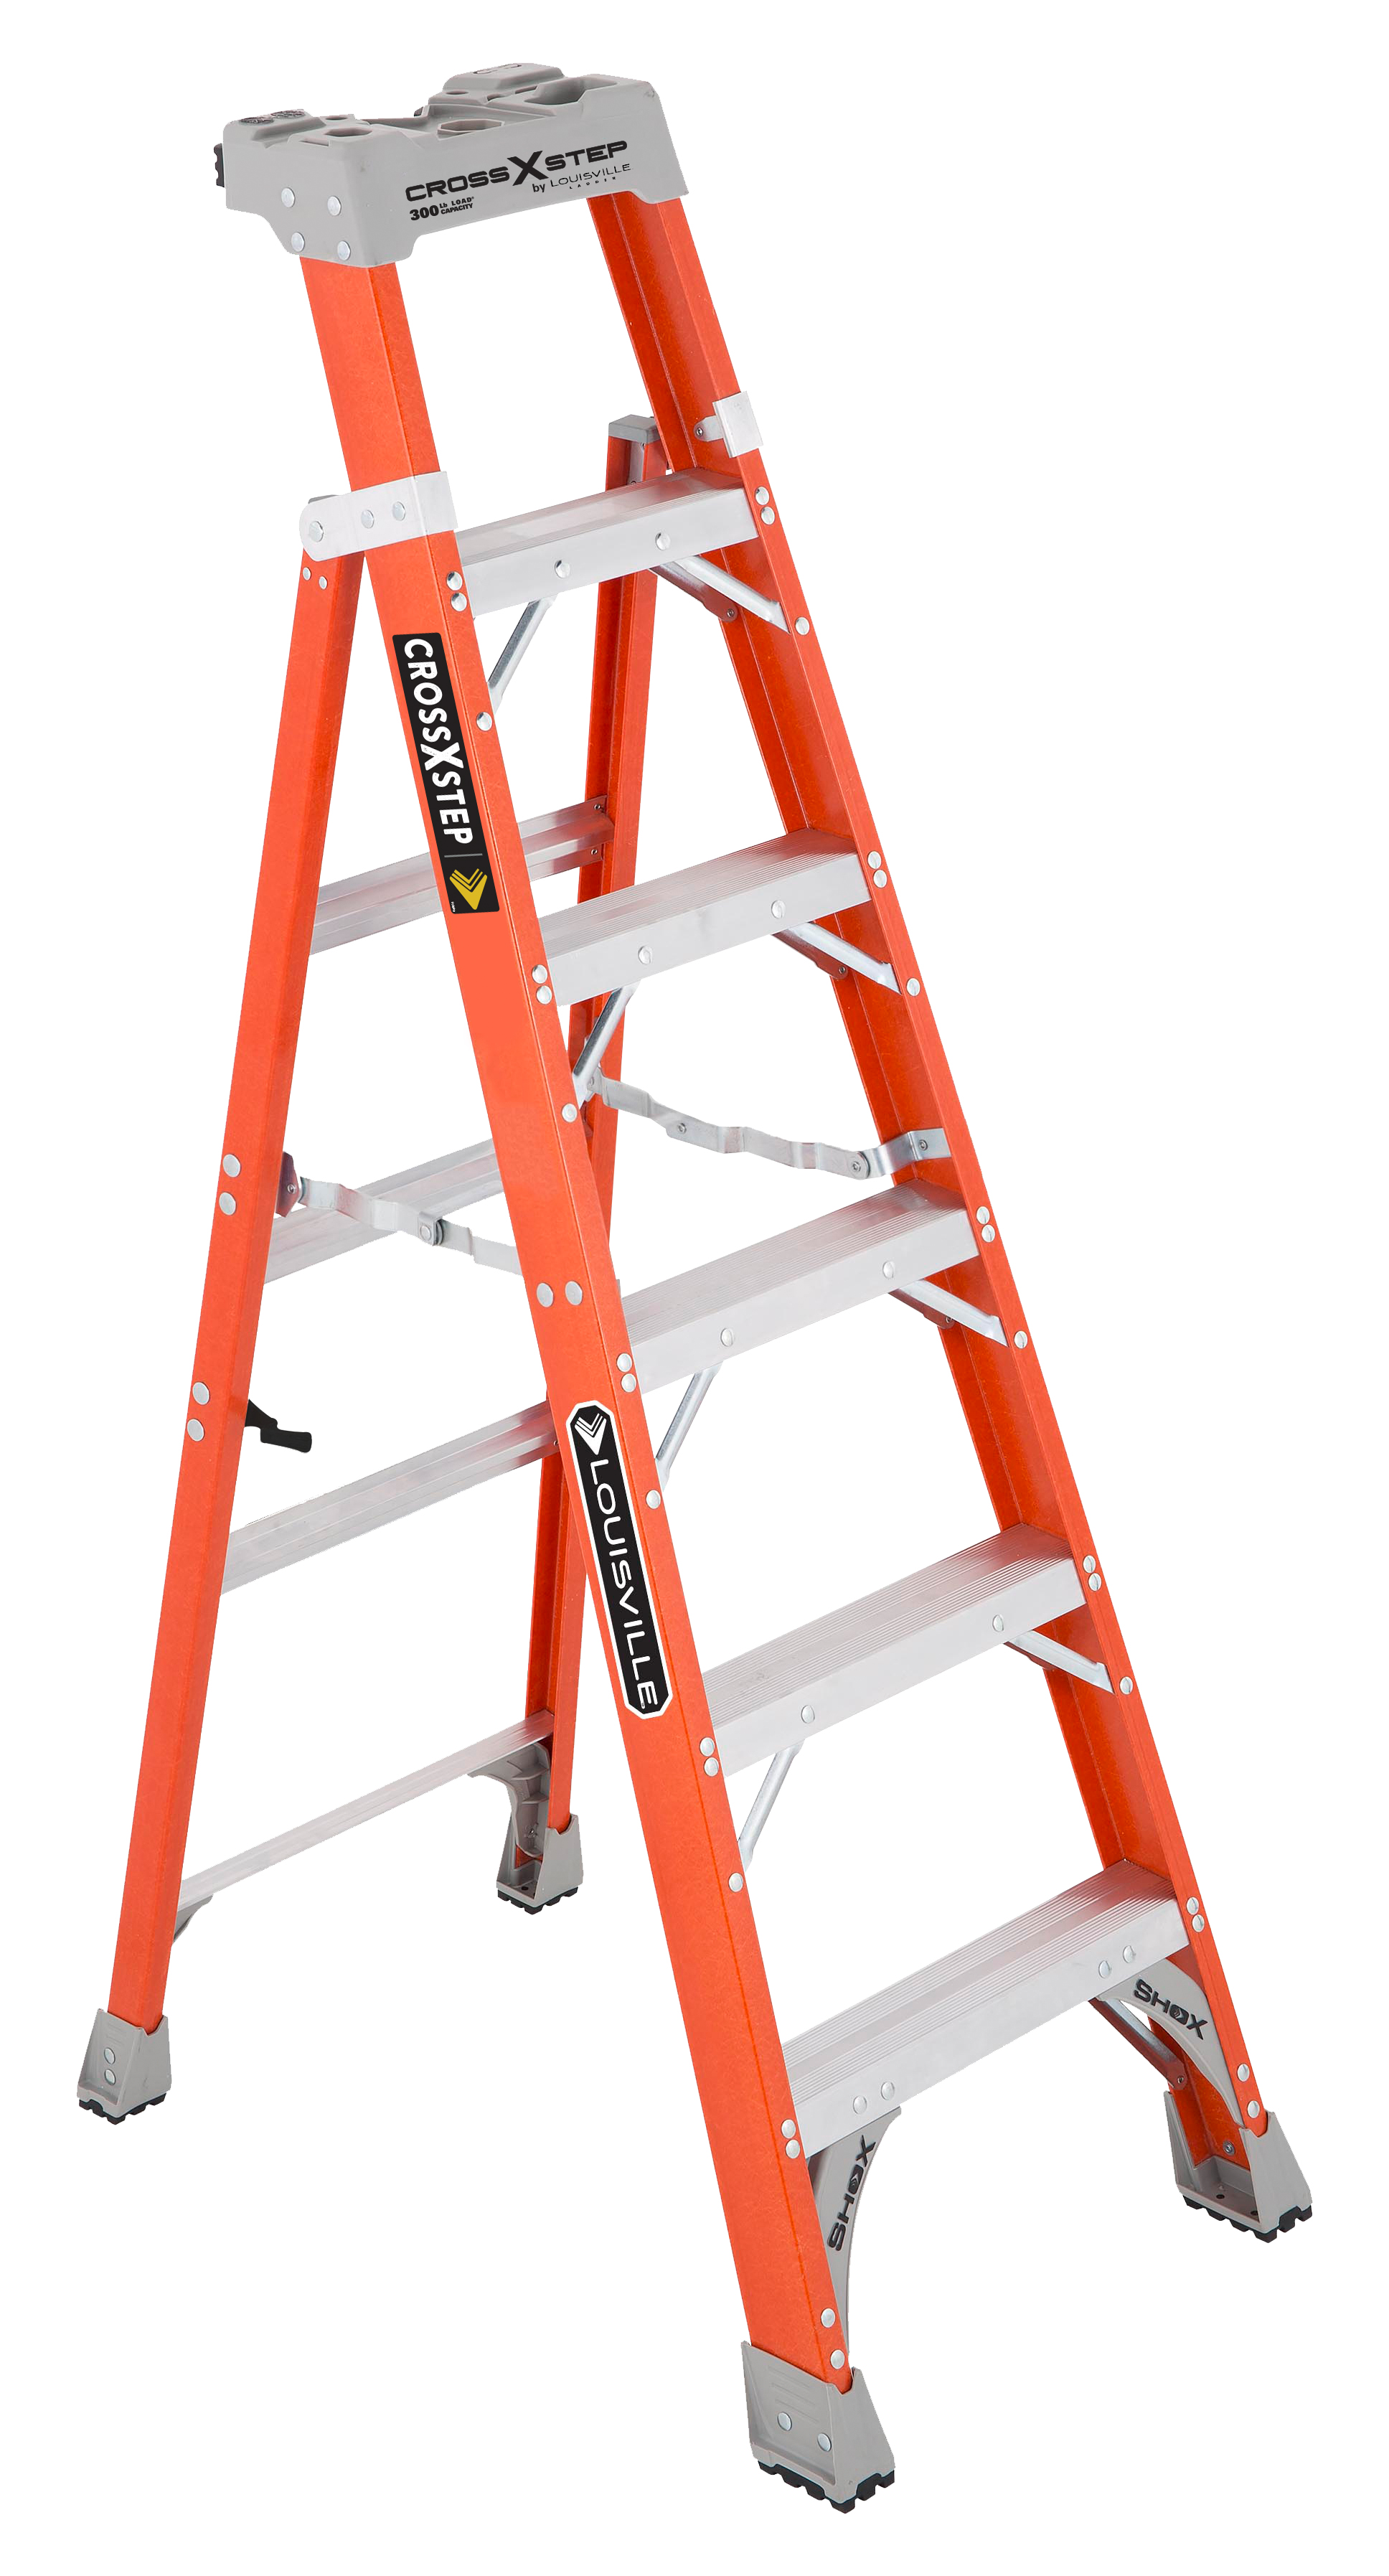 Louisville 6-foot fiberglass cross step ladder with 300-lbs capacity for $59